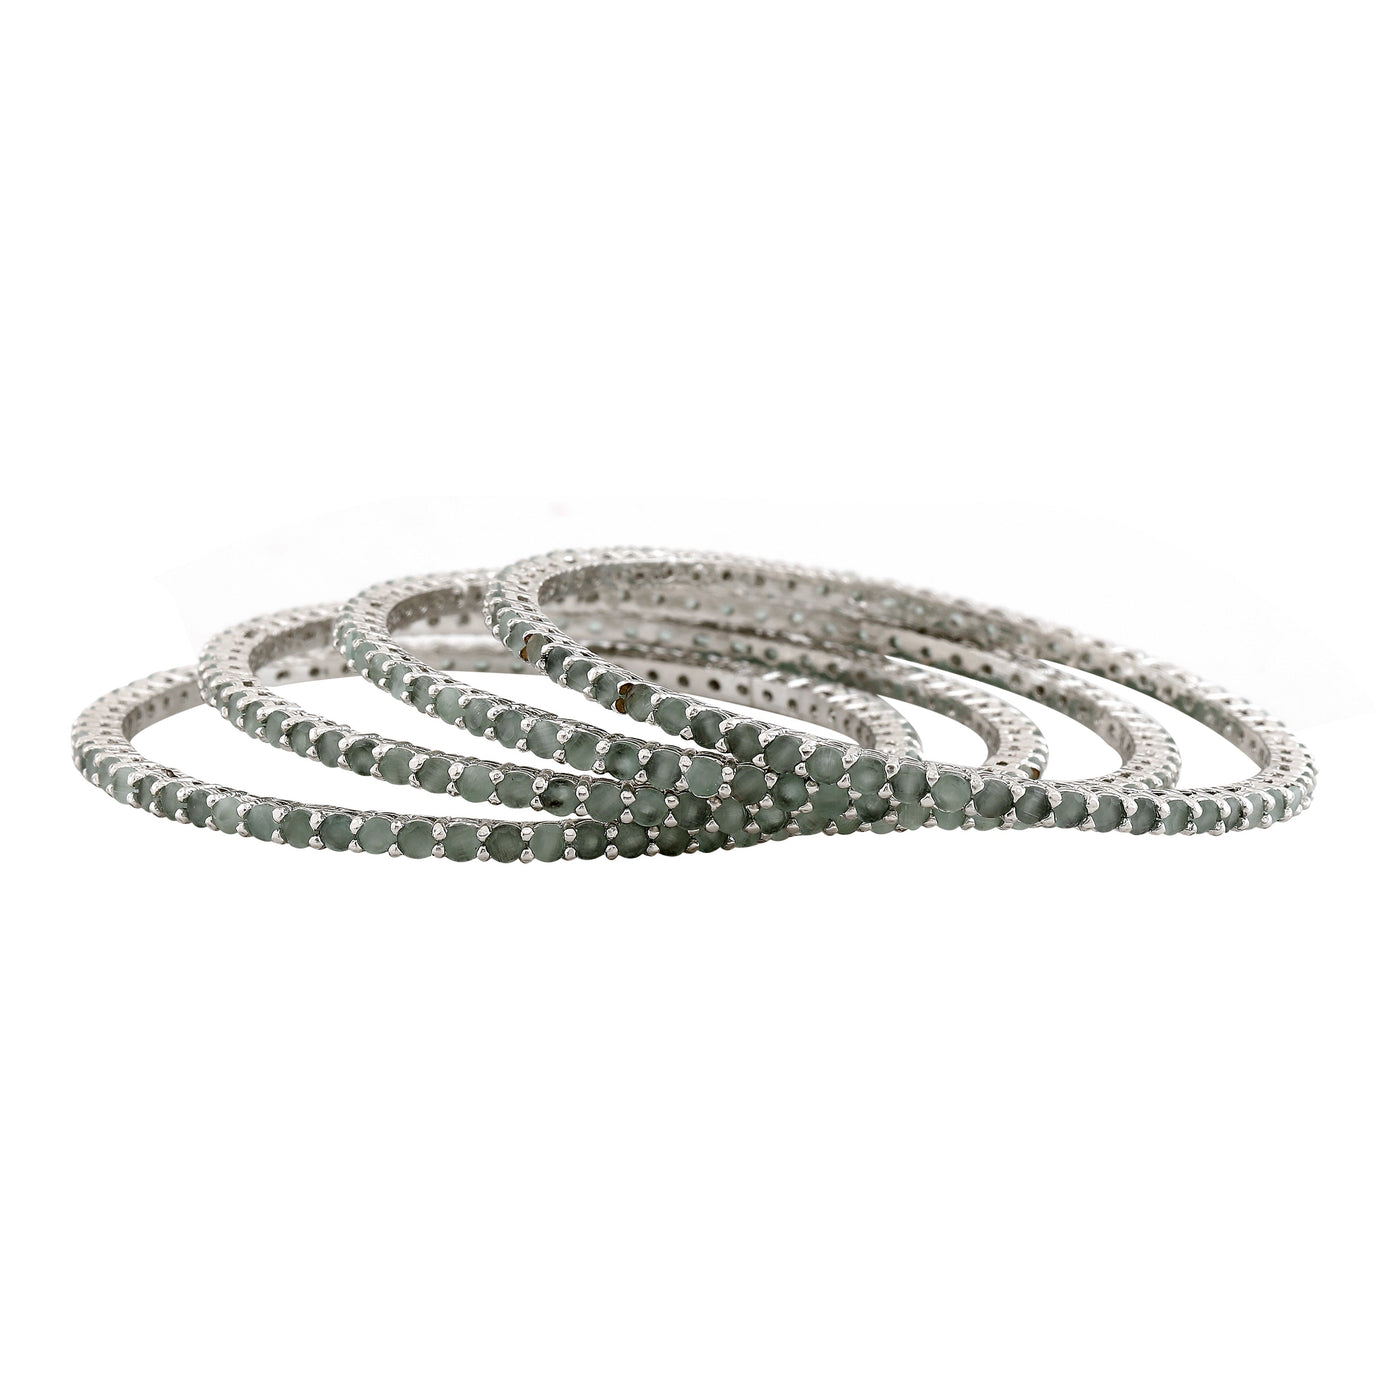 Estele Rhodium Plated CZ Fascinating Designer Bangles with Mint Green Crystals for Women